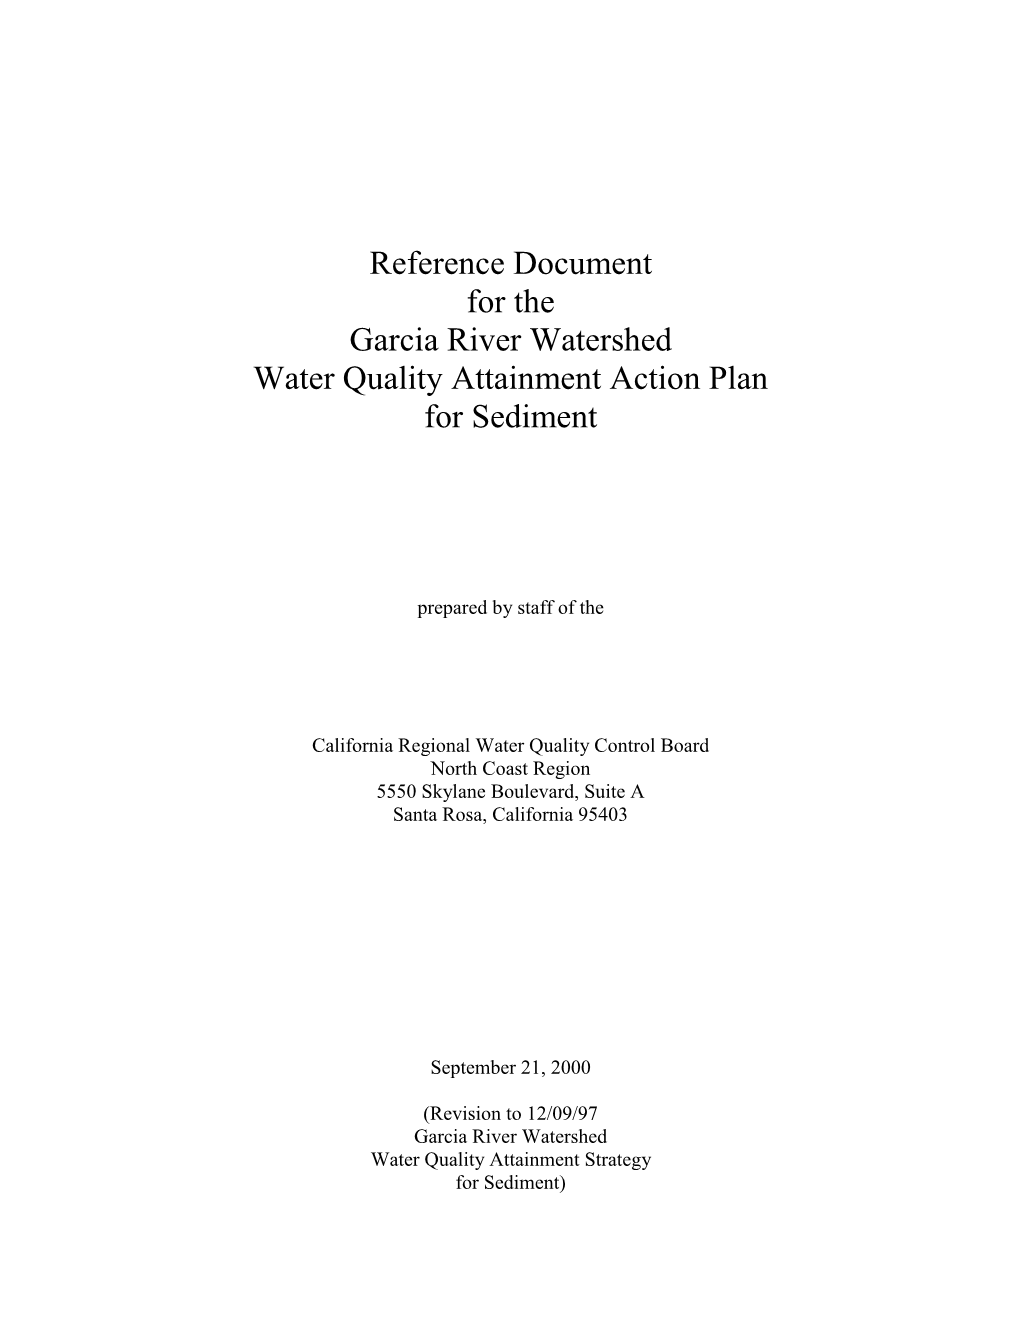 Garcia River Watershed Water Quality Attainment Action Plan for Sediment